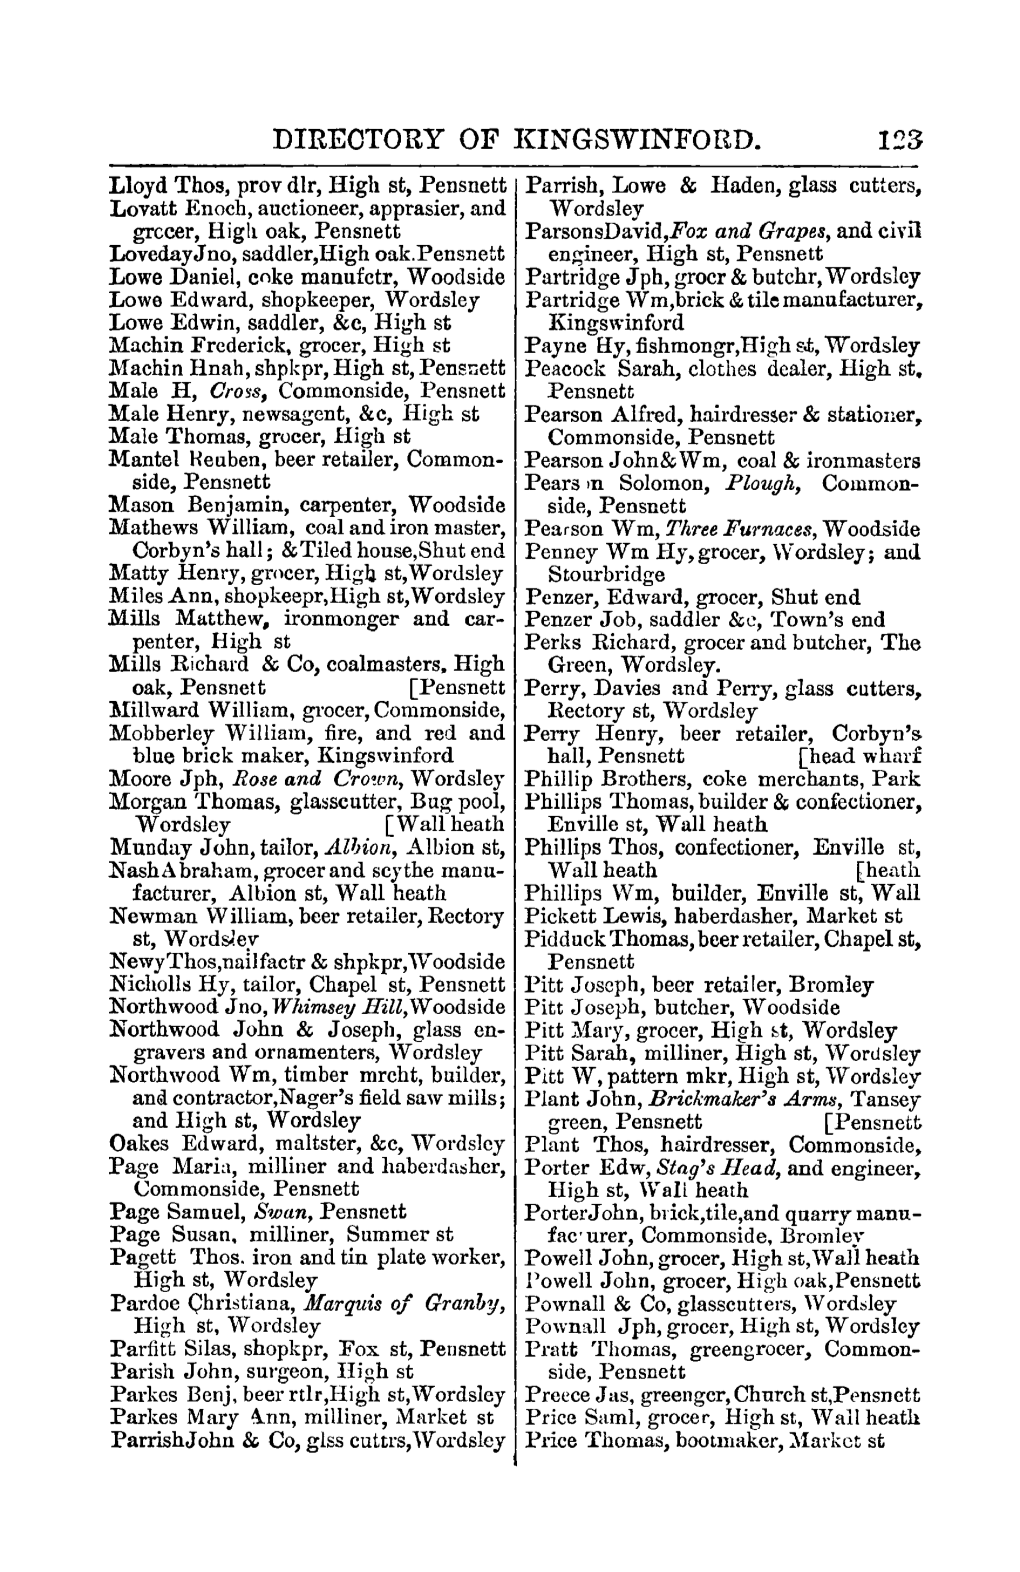 Directory of Kingswinford